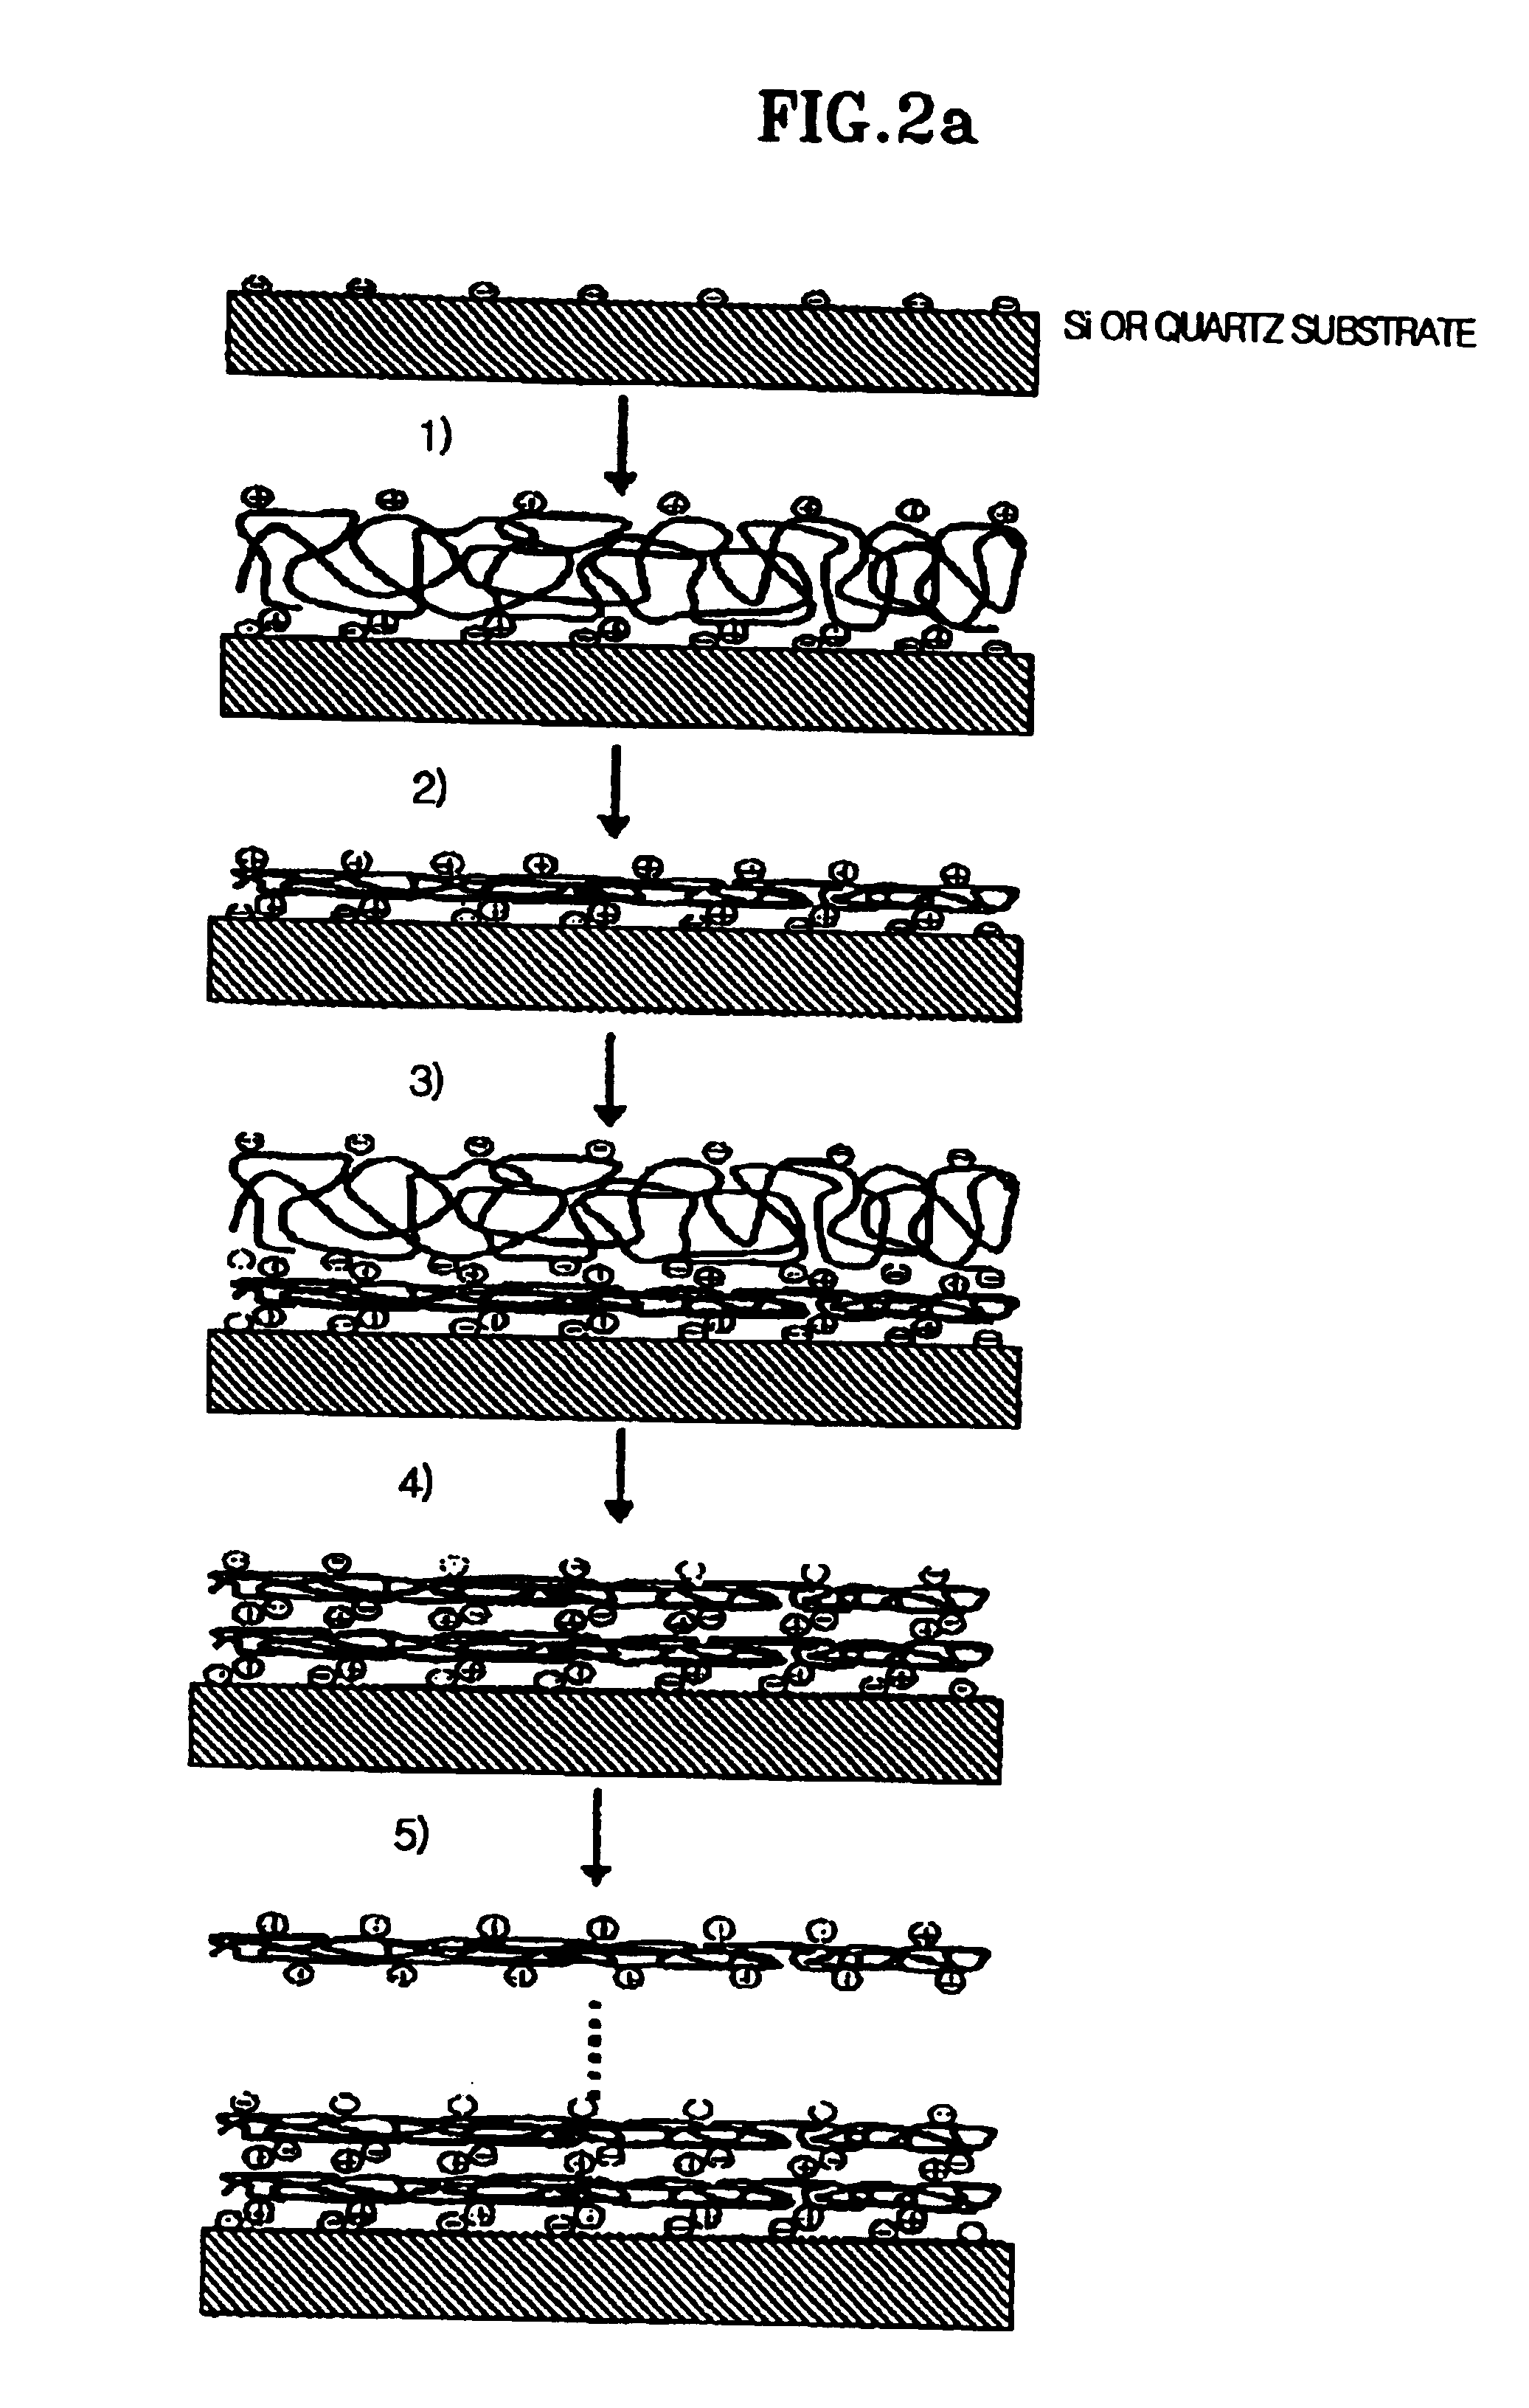 Process for fabricating monolayer/multilayer ultrathin films